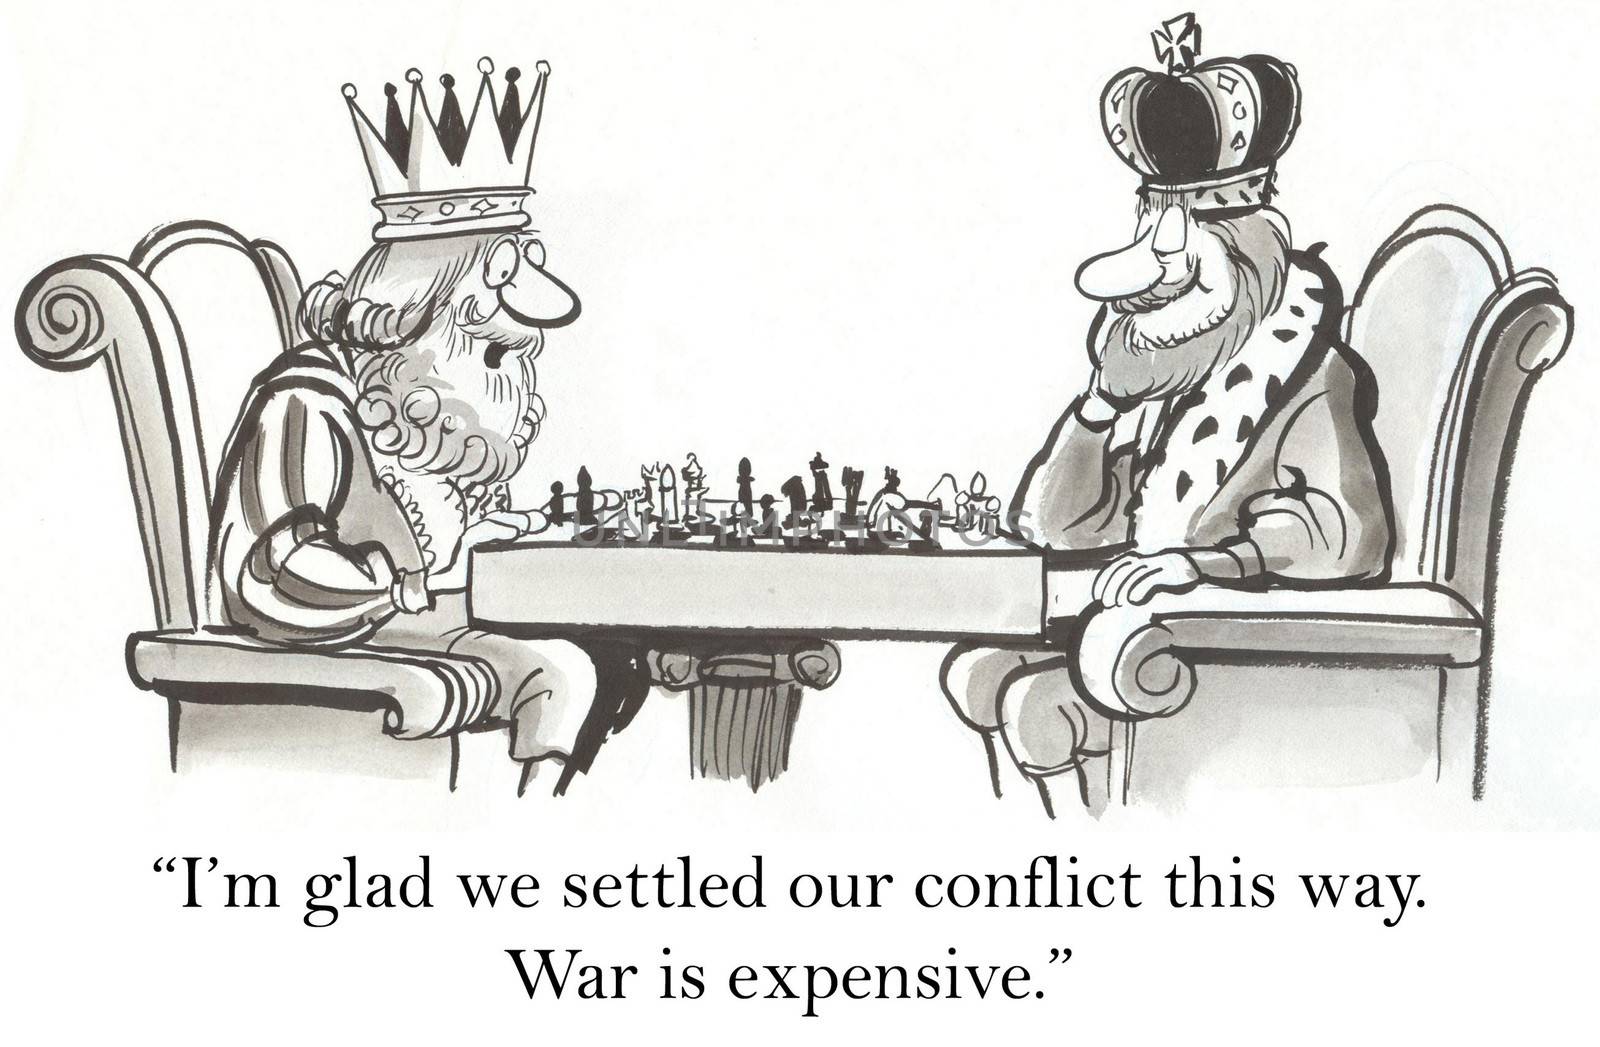 "I'm glad we settled our conflict this way.  War is expensive."